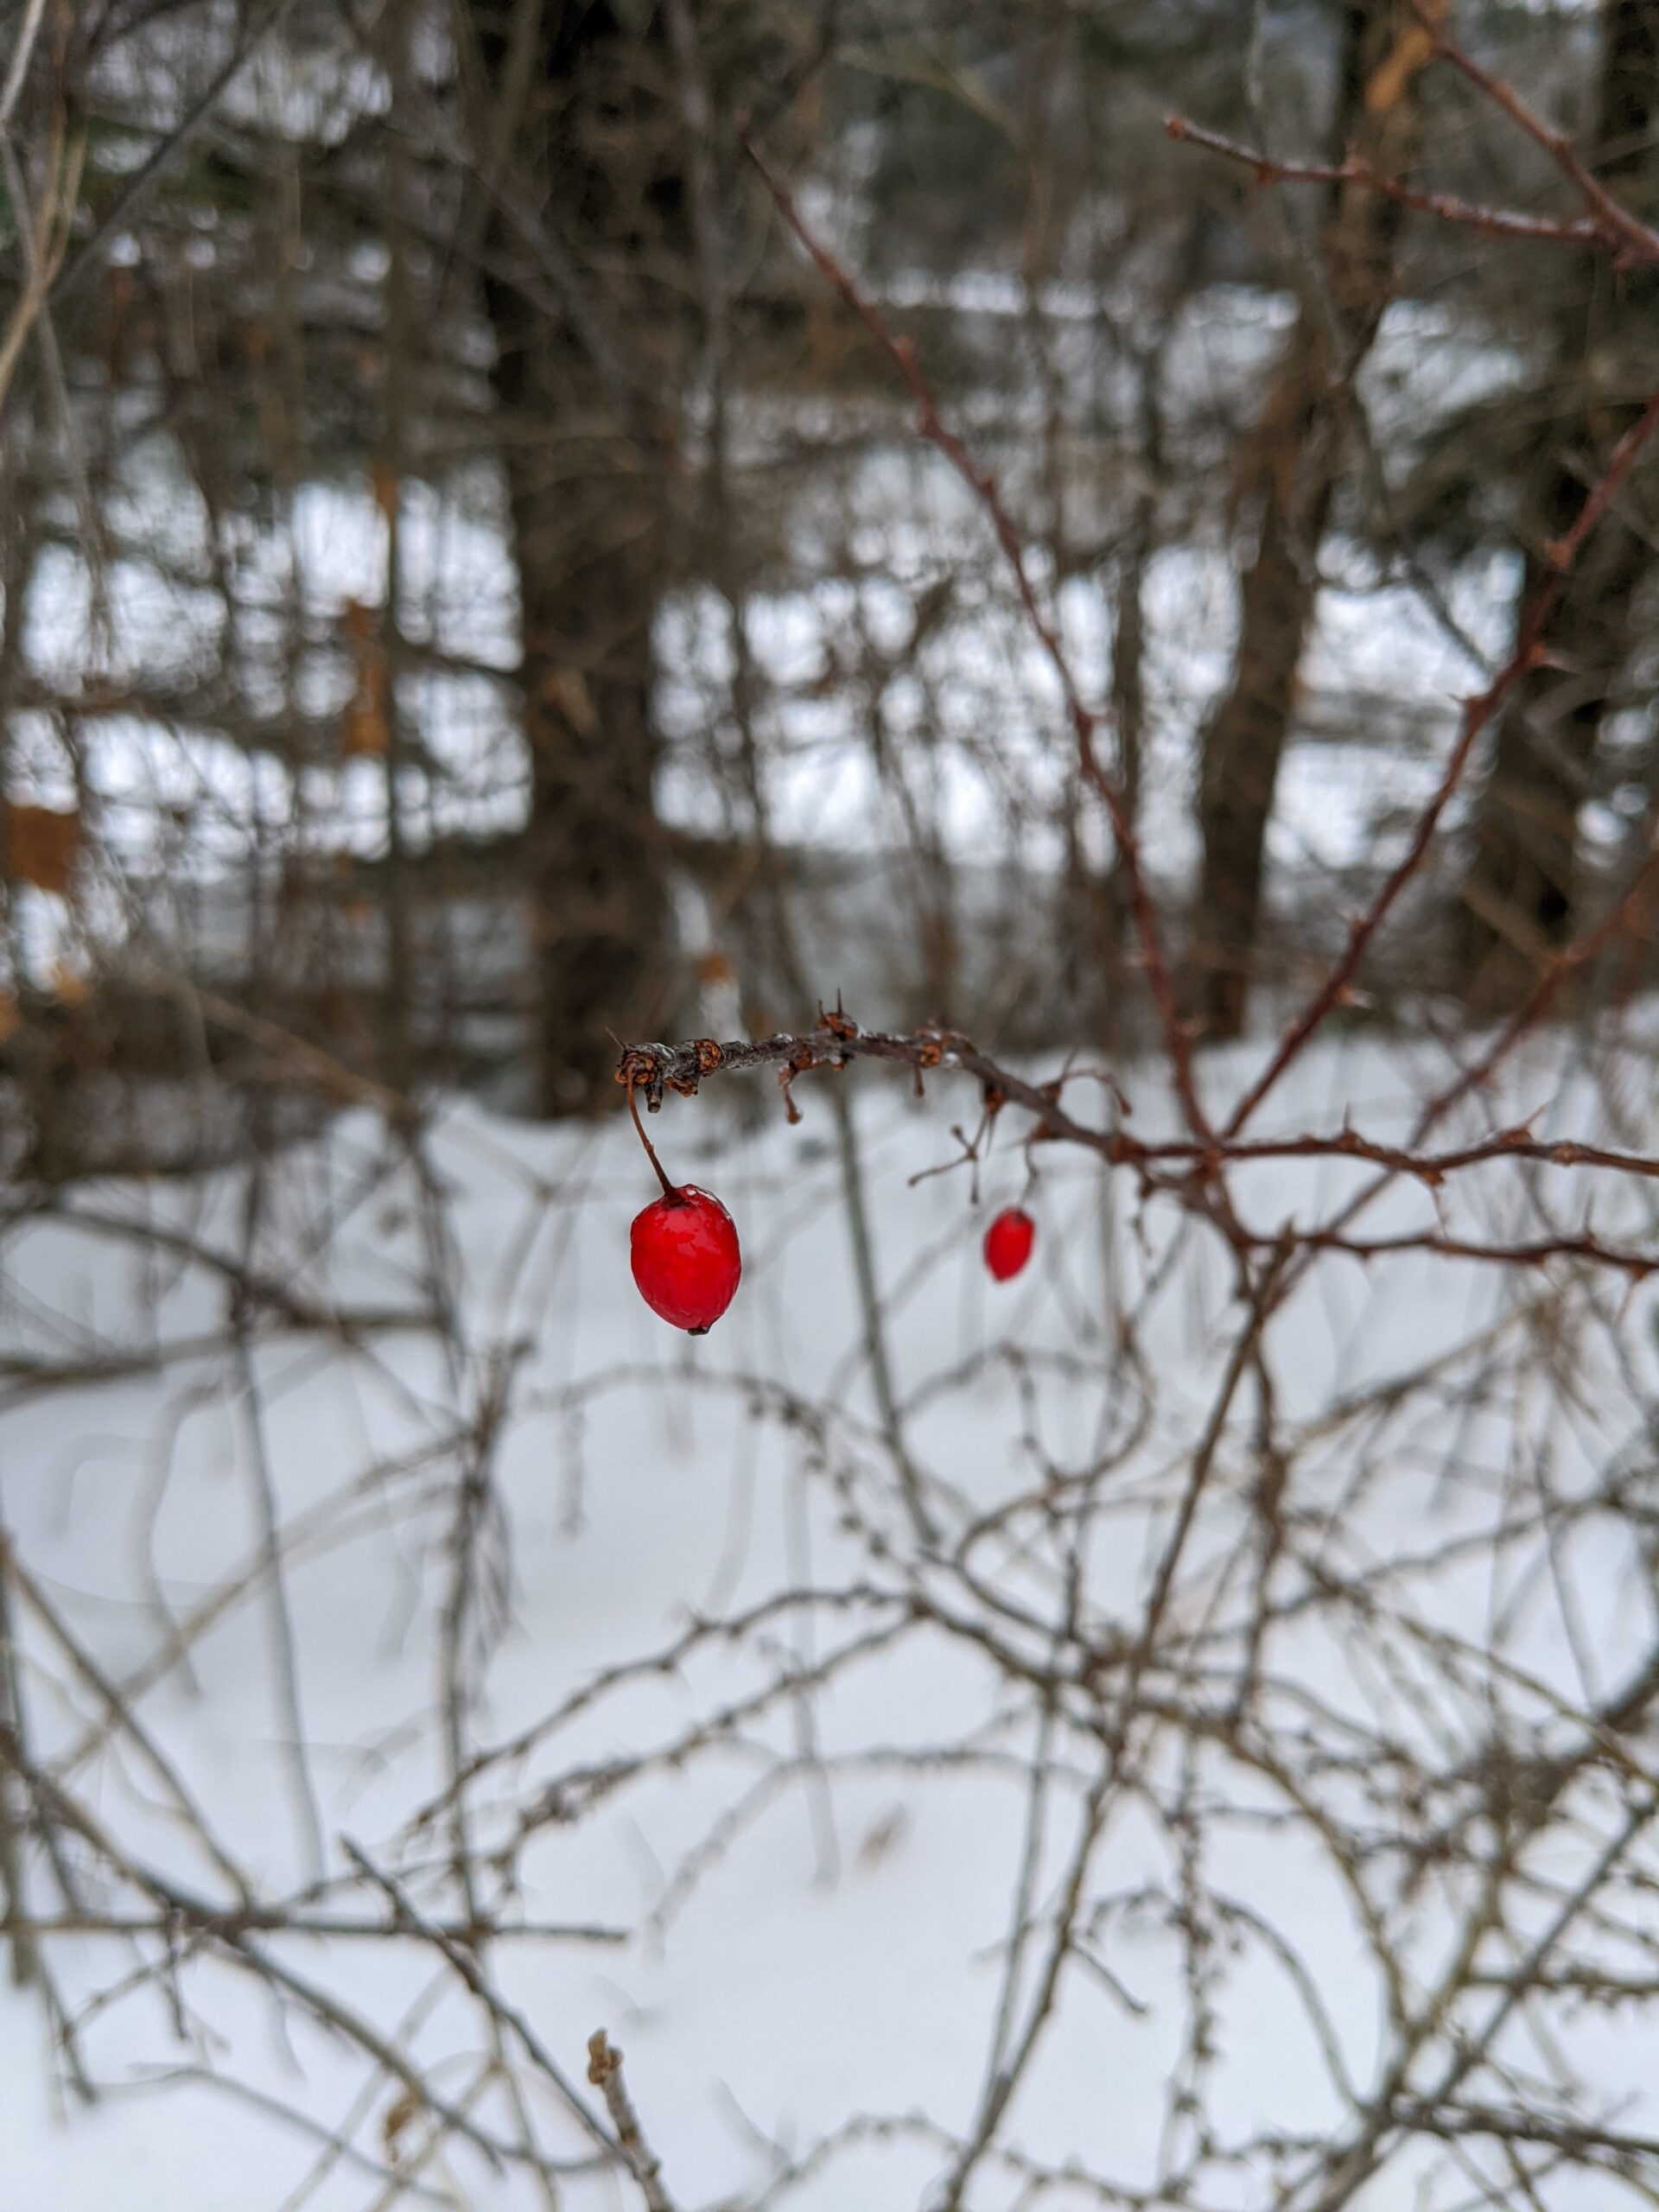 a branch with two red berries in the foreground, with snow and trees in the background